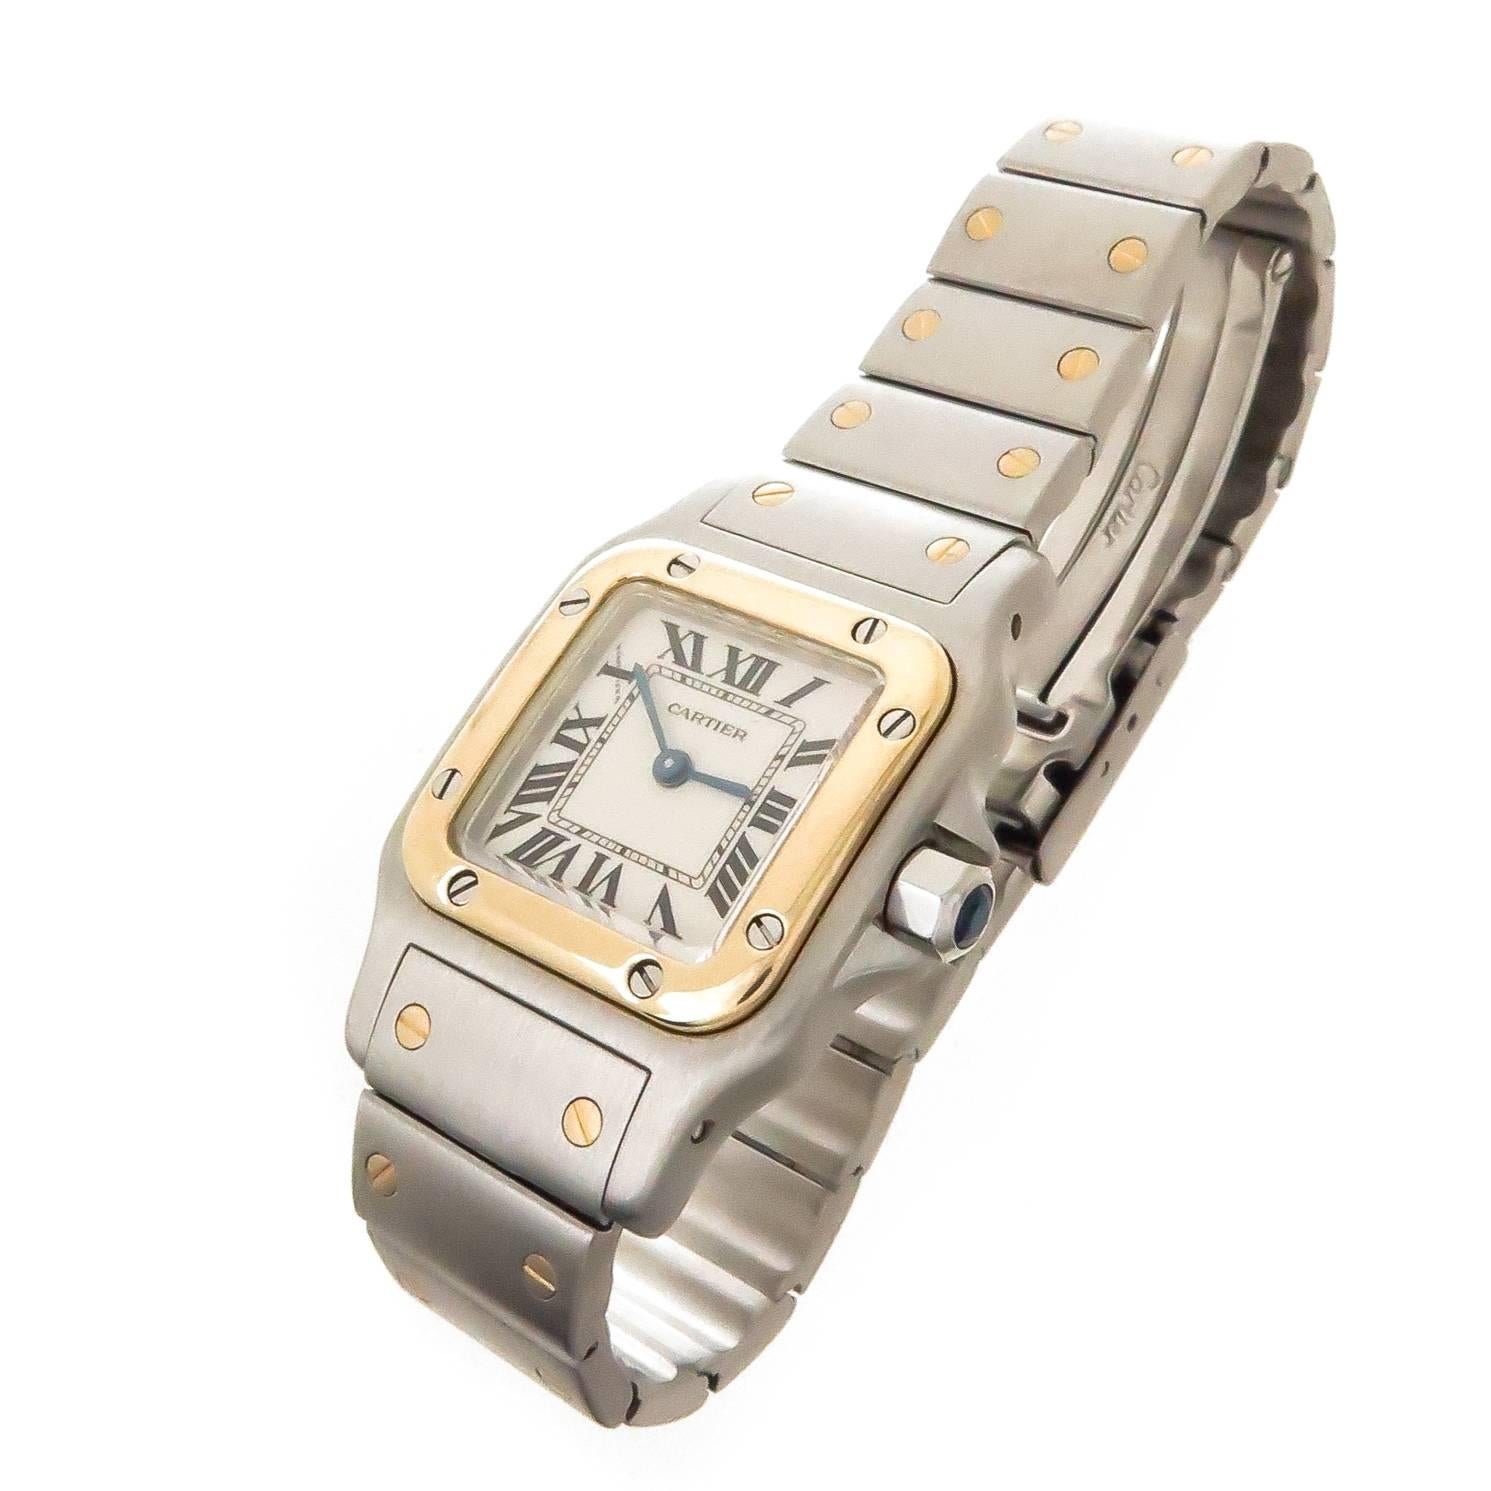 Circa 2000 Cartier Santos Ladies Wrist watch, 35 X 33 MM Stainless Steel and 18K Yellow Gold Water Resistant case. Quartz Movement, White Dial with Black Roman Numerals and a Sapphire Crown. 1/2 inch wide Steel and 18K bracelet with Deployment